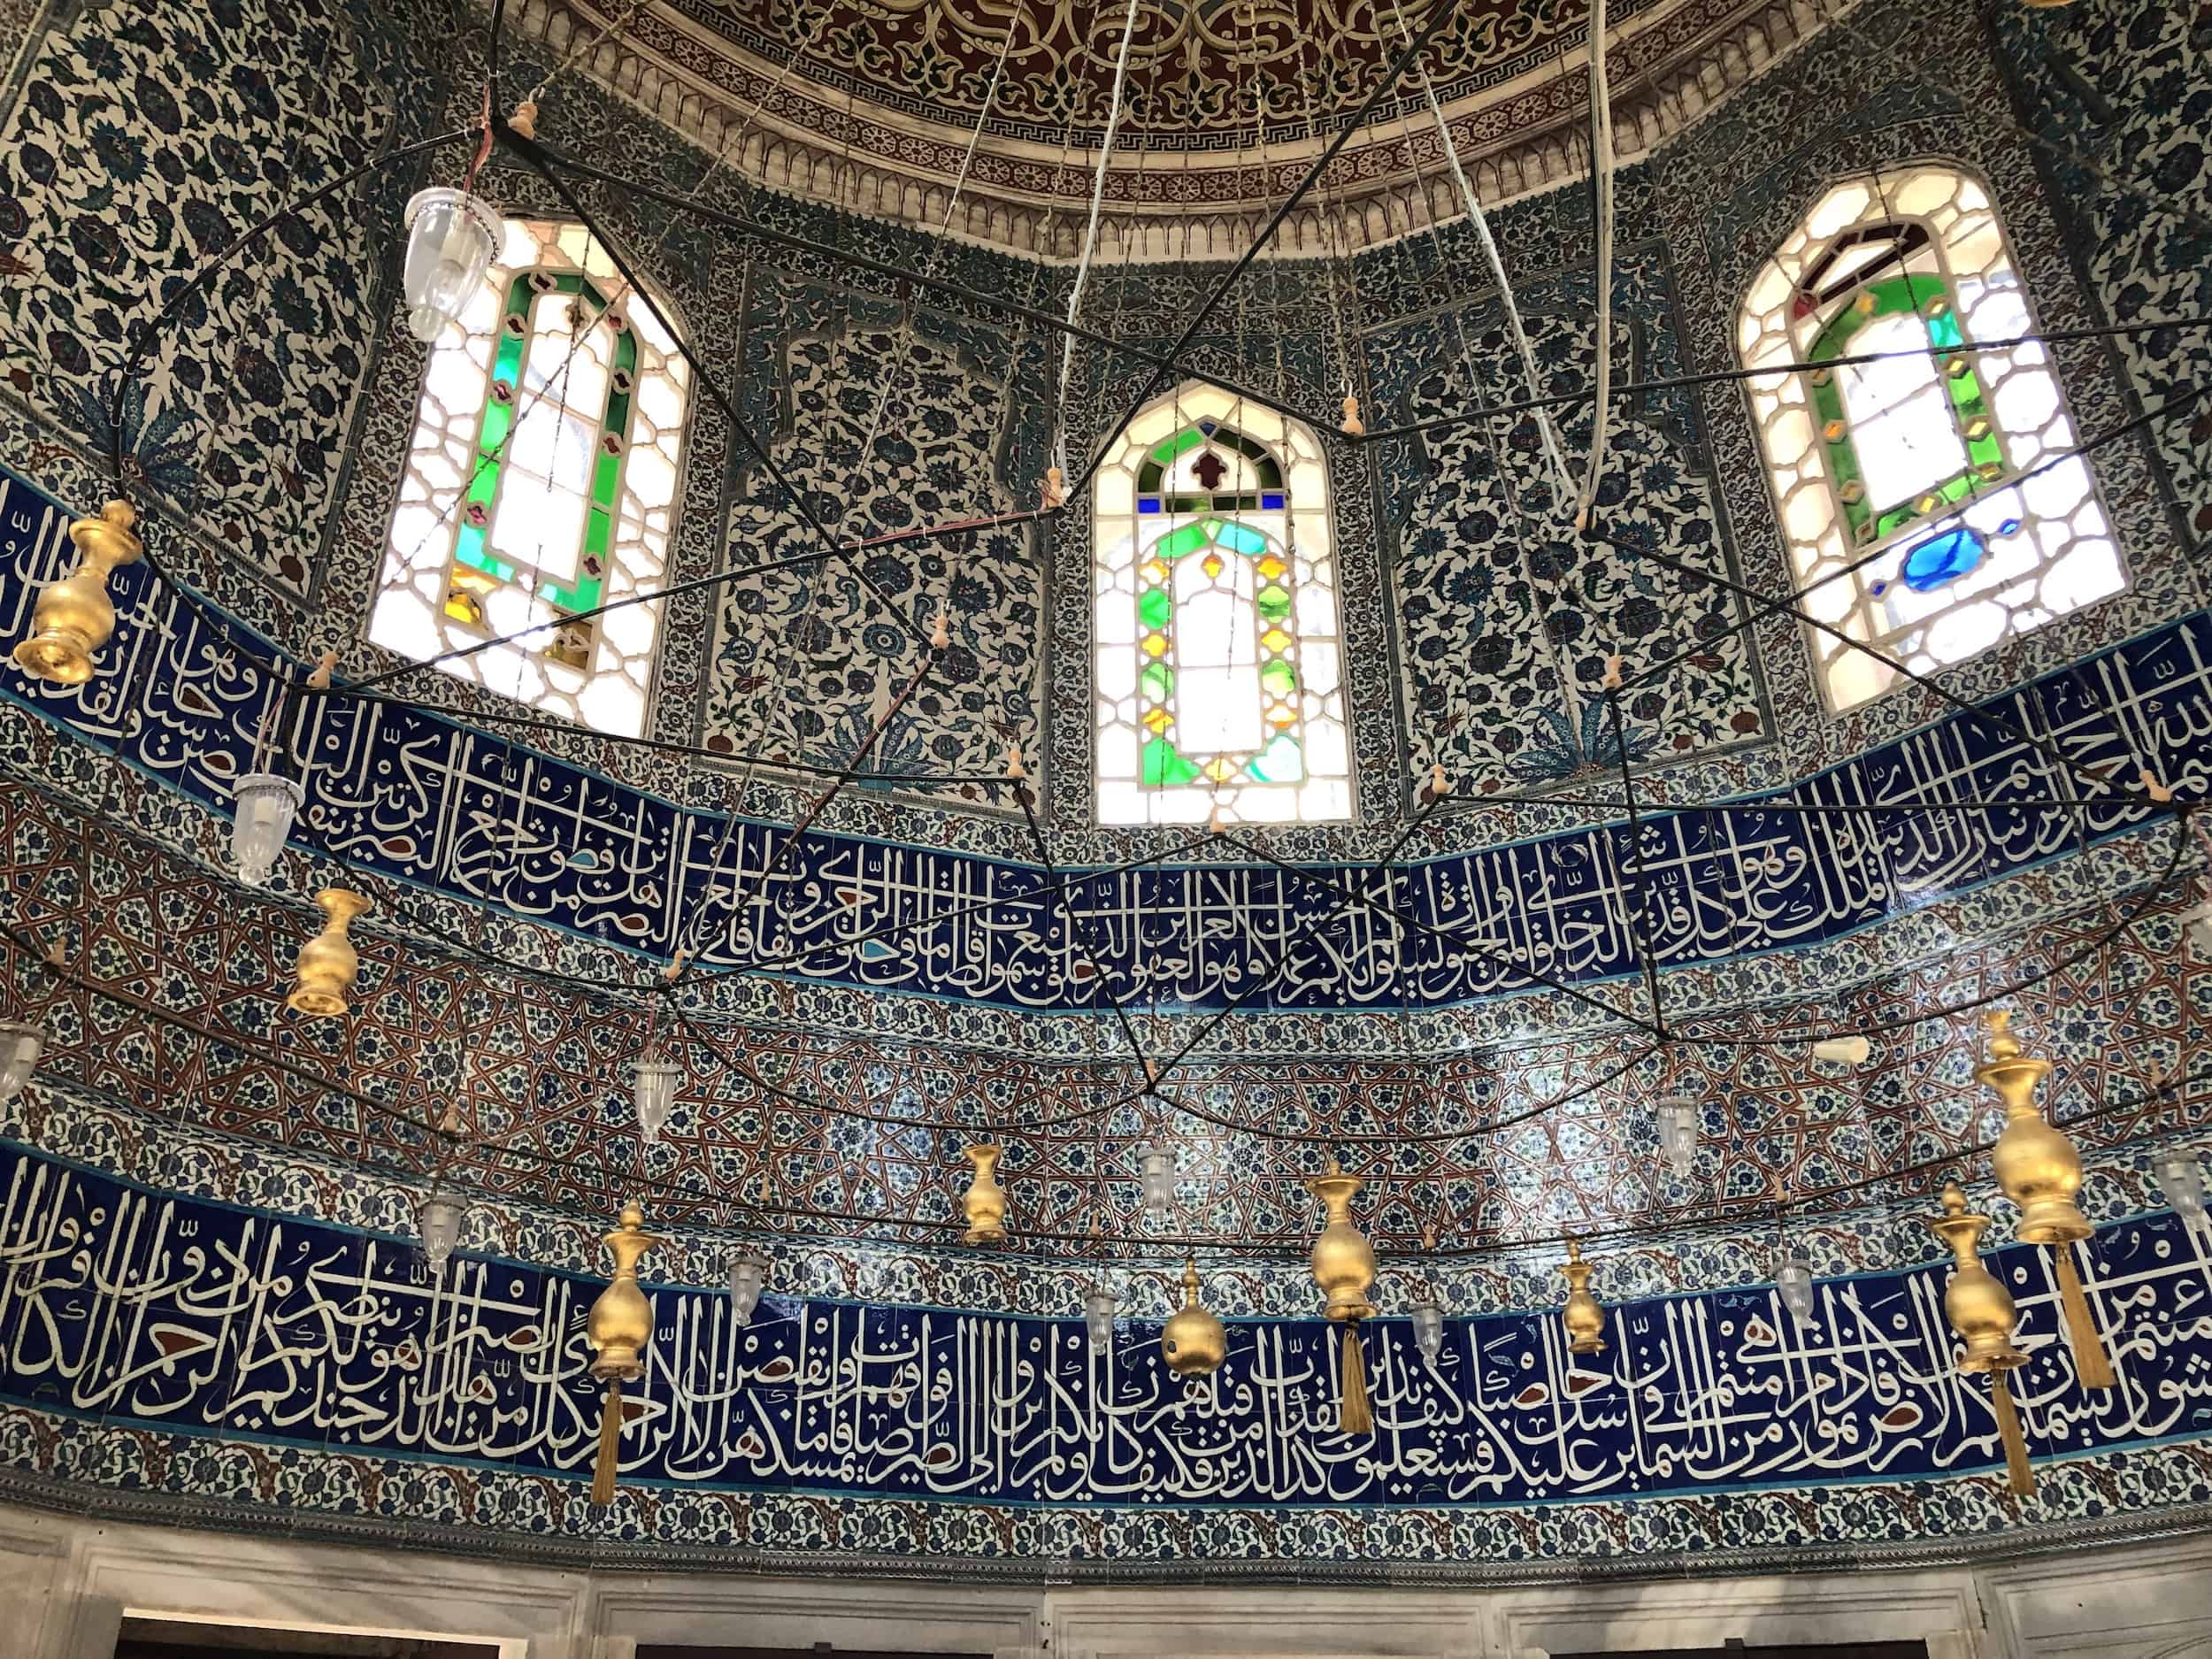 Tiles of the Tomb of Damat Ibrahim Pasha at the Şehzade Mosque Complex in Istanbul, Turkey